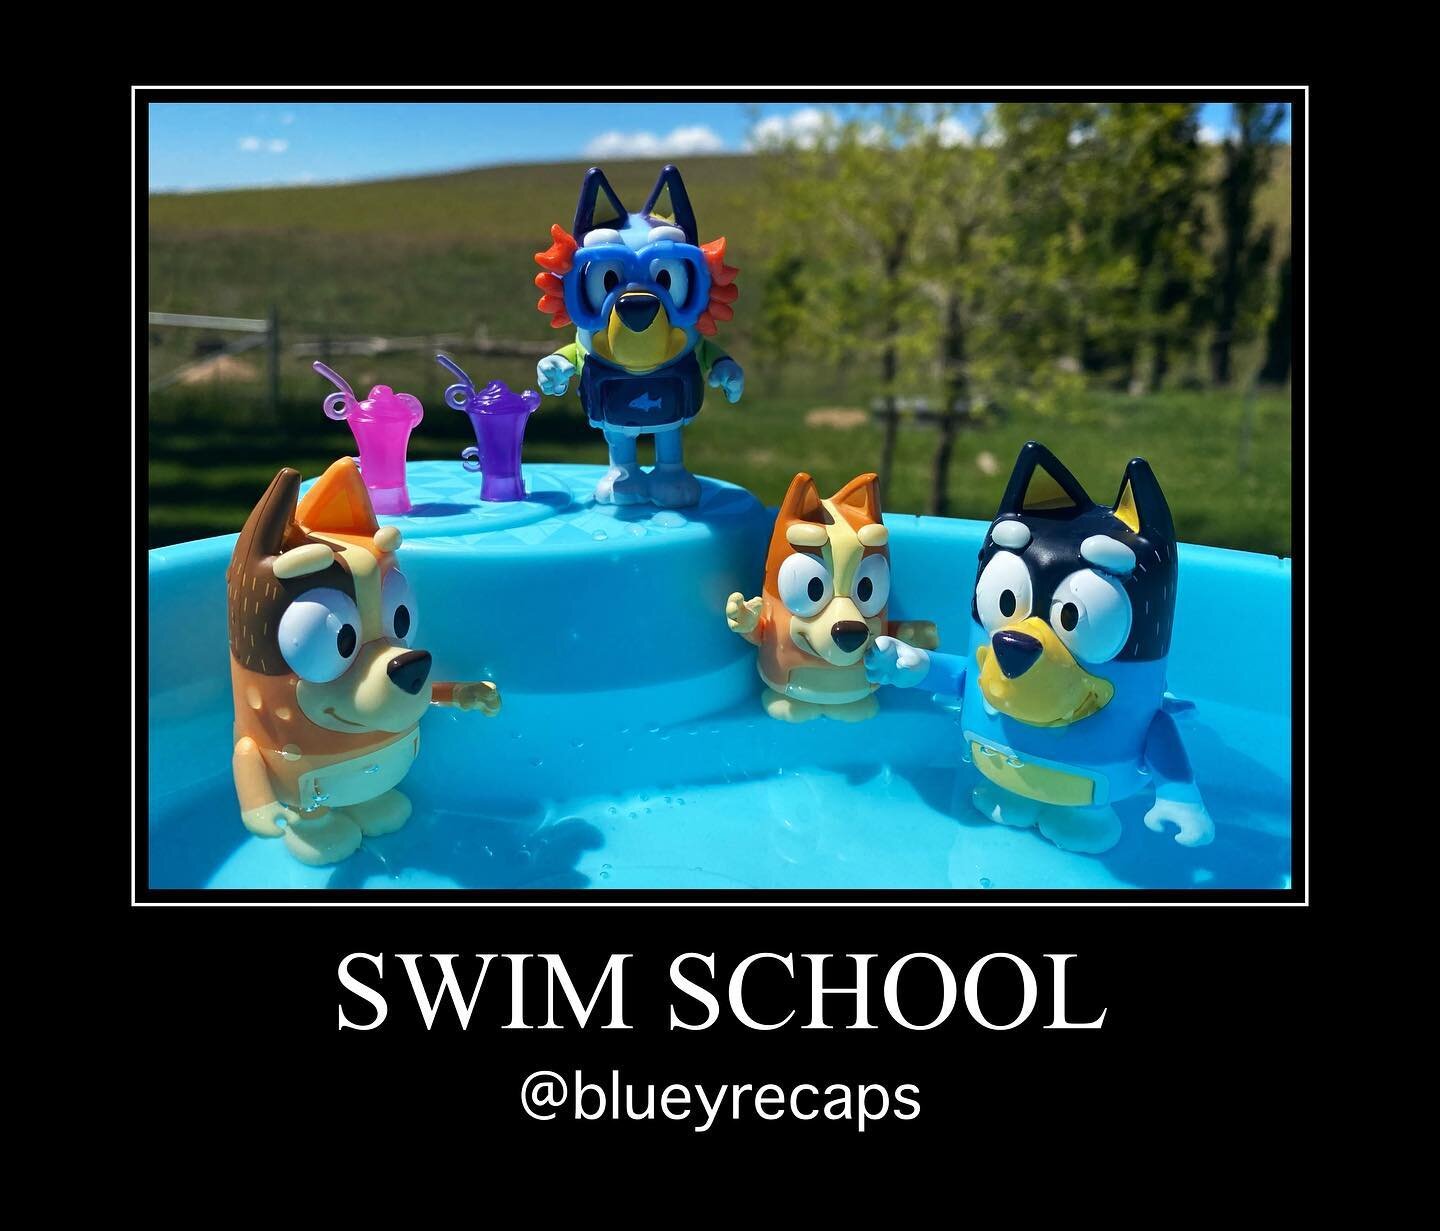 Bluey Recap: Swim School (#2.39)
#bestbits: Bandit rolling into the pool to avoid a difficult conversation
#lifelesson: dobbing is ok if someone is in danger, and don&rsquo;t pee in the pool 
.
The Heeler&rsquo;s are on holiday and Chilli and Bandit 